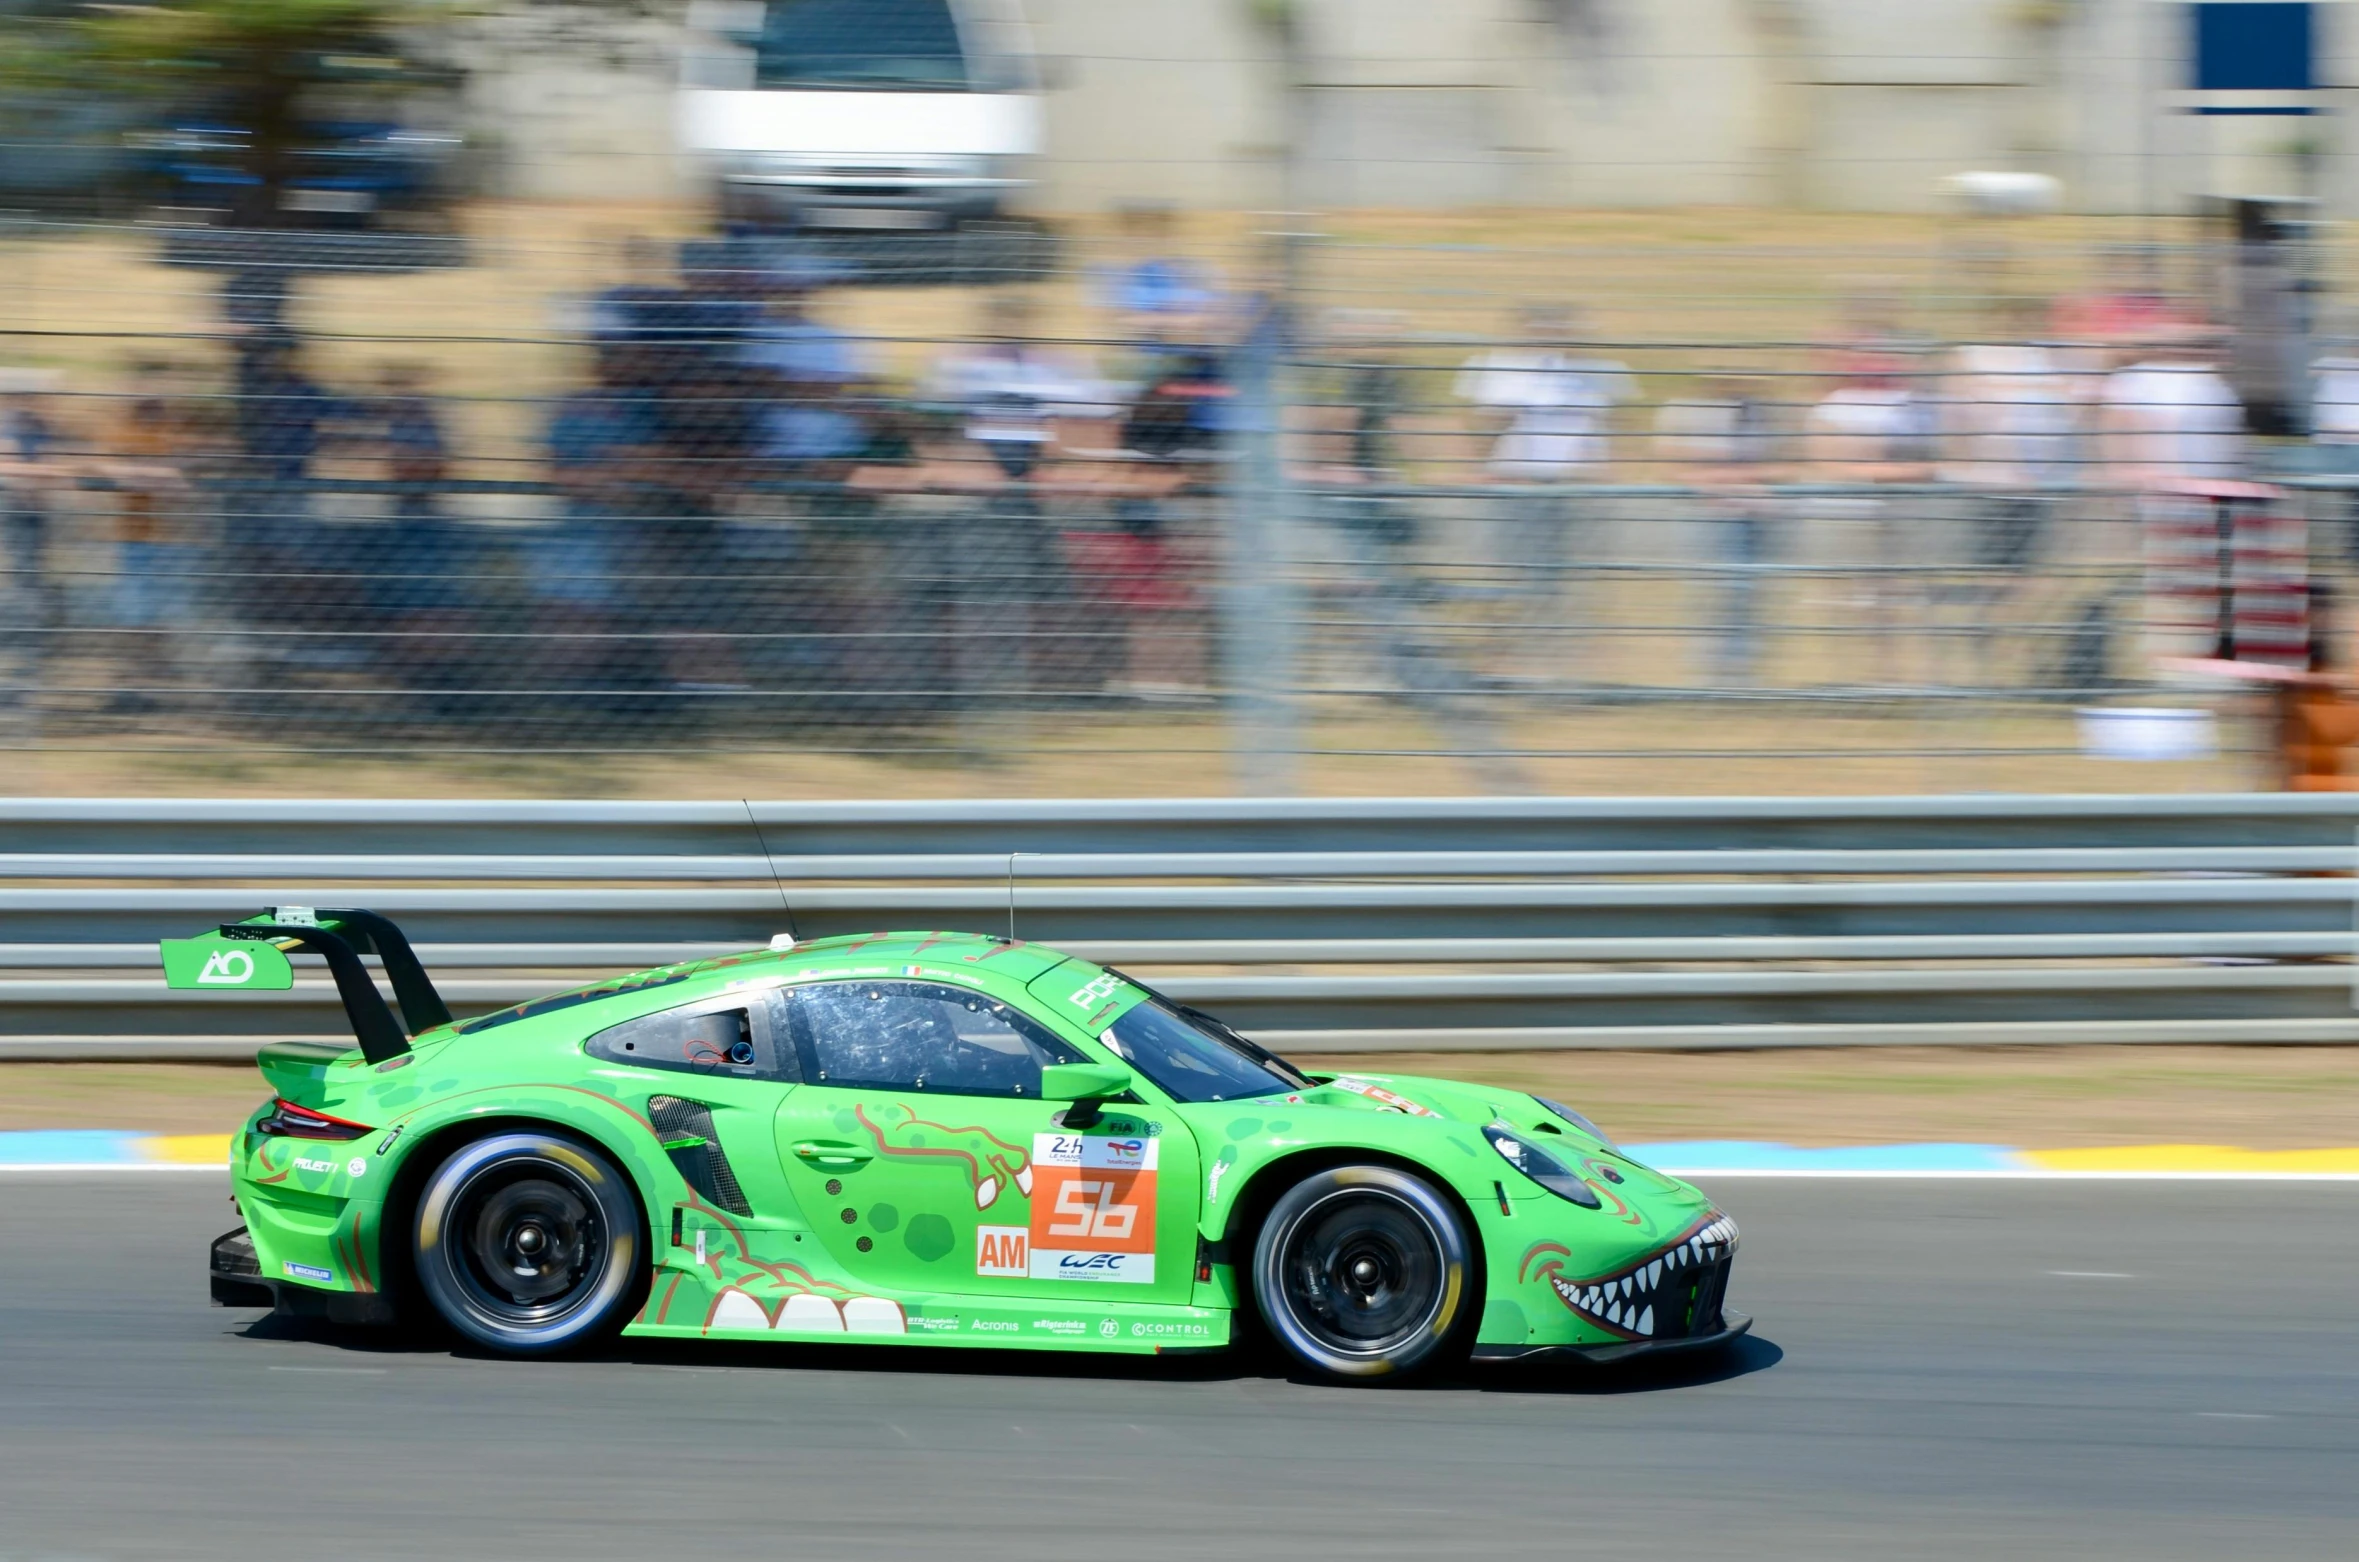 a green sports car racing on a racetrack